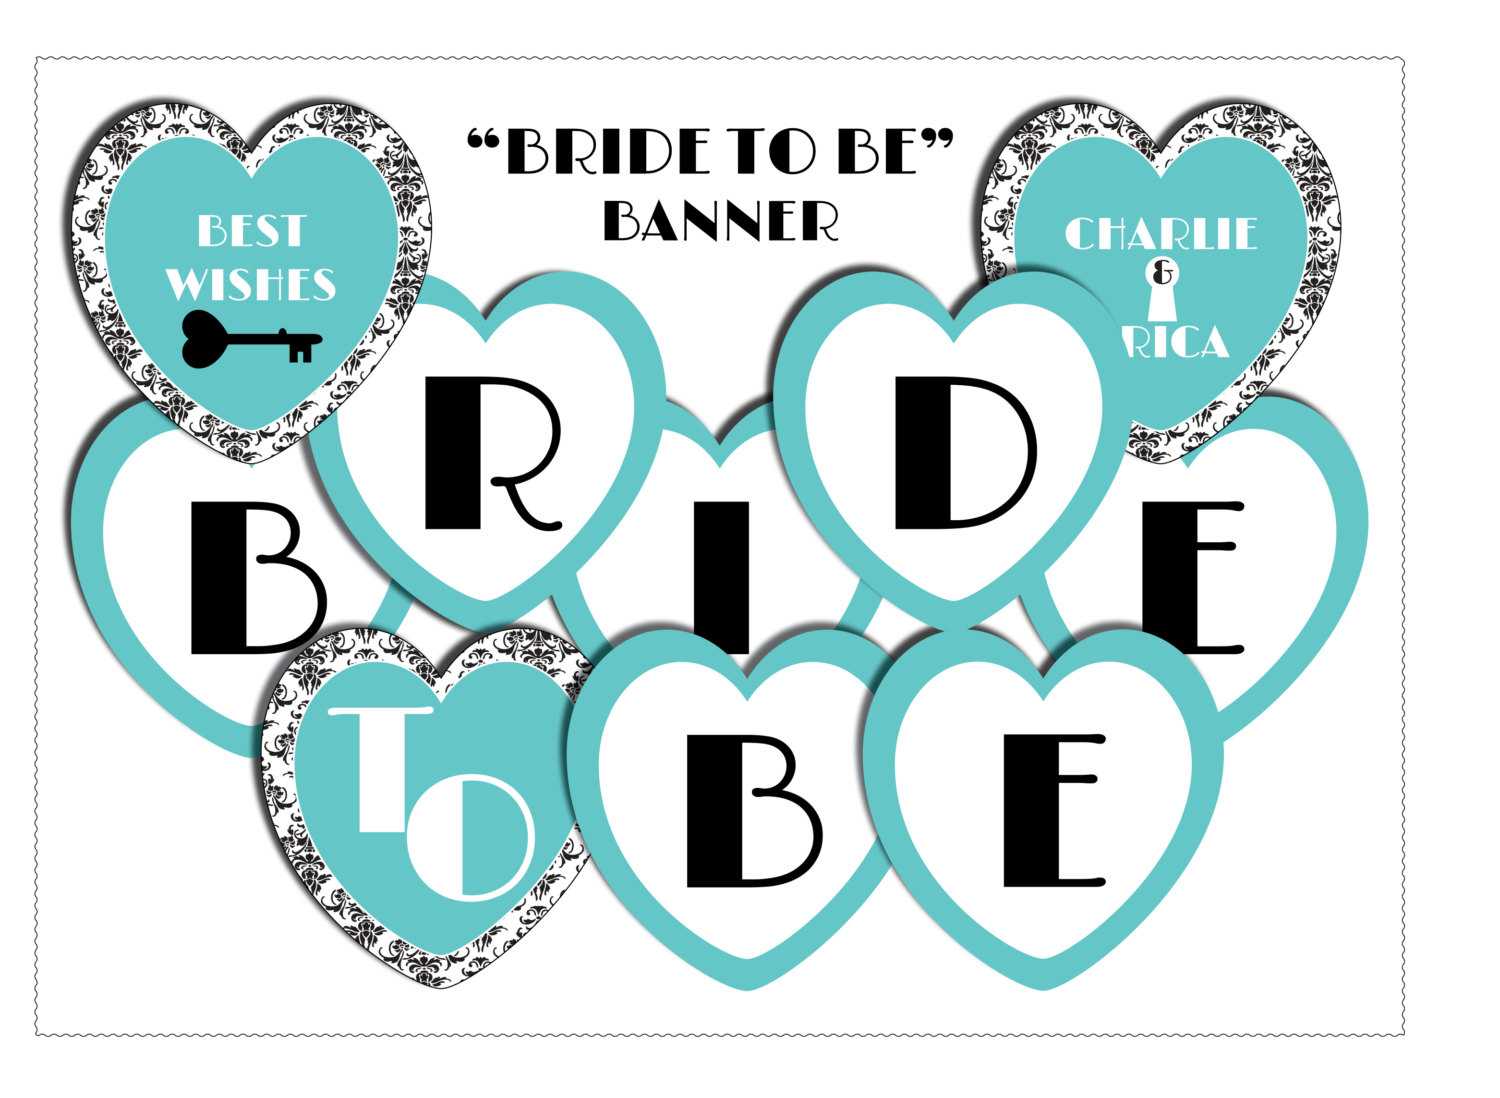 11 Best Photos Of Bride To Be Banner Template - Diy Bridal With Free Bridal Shower Banner Template